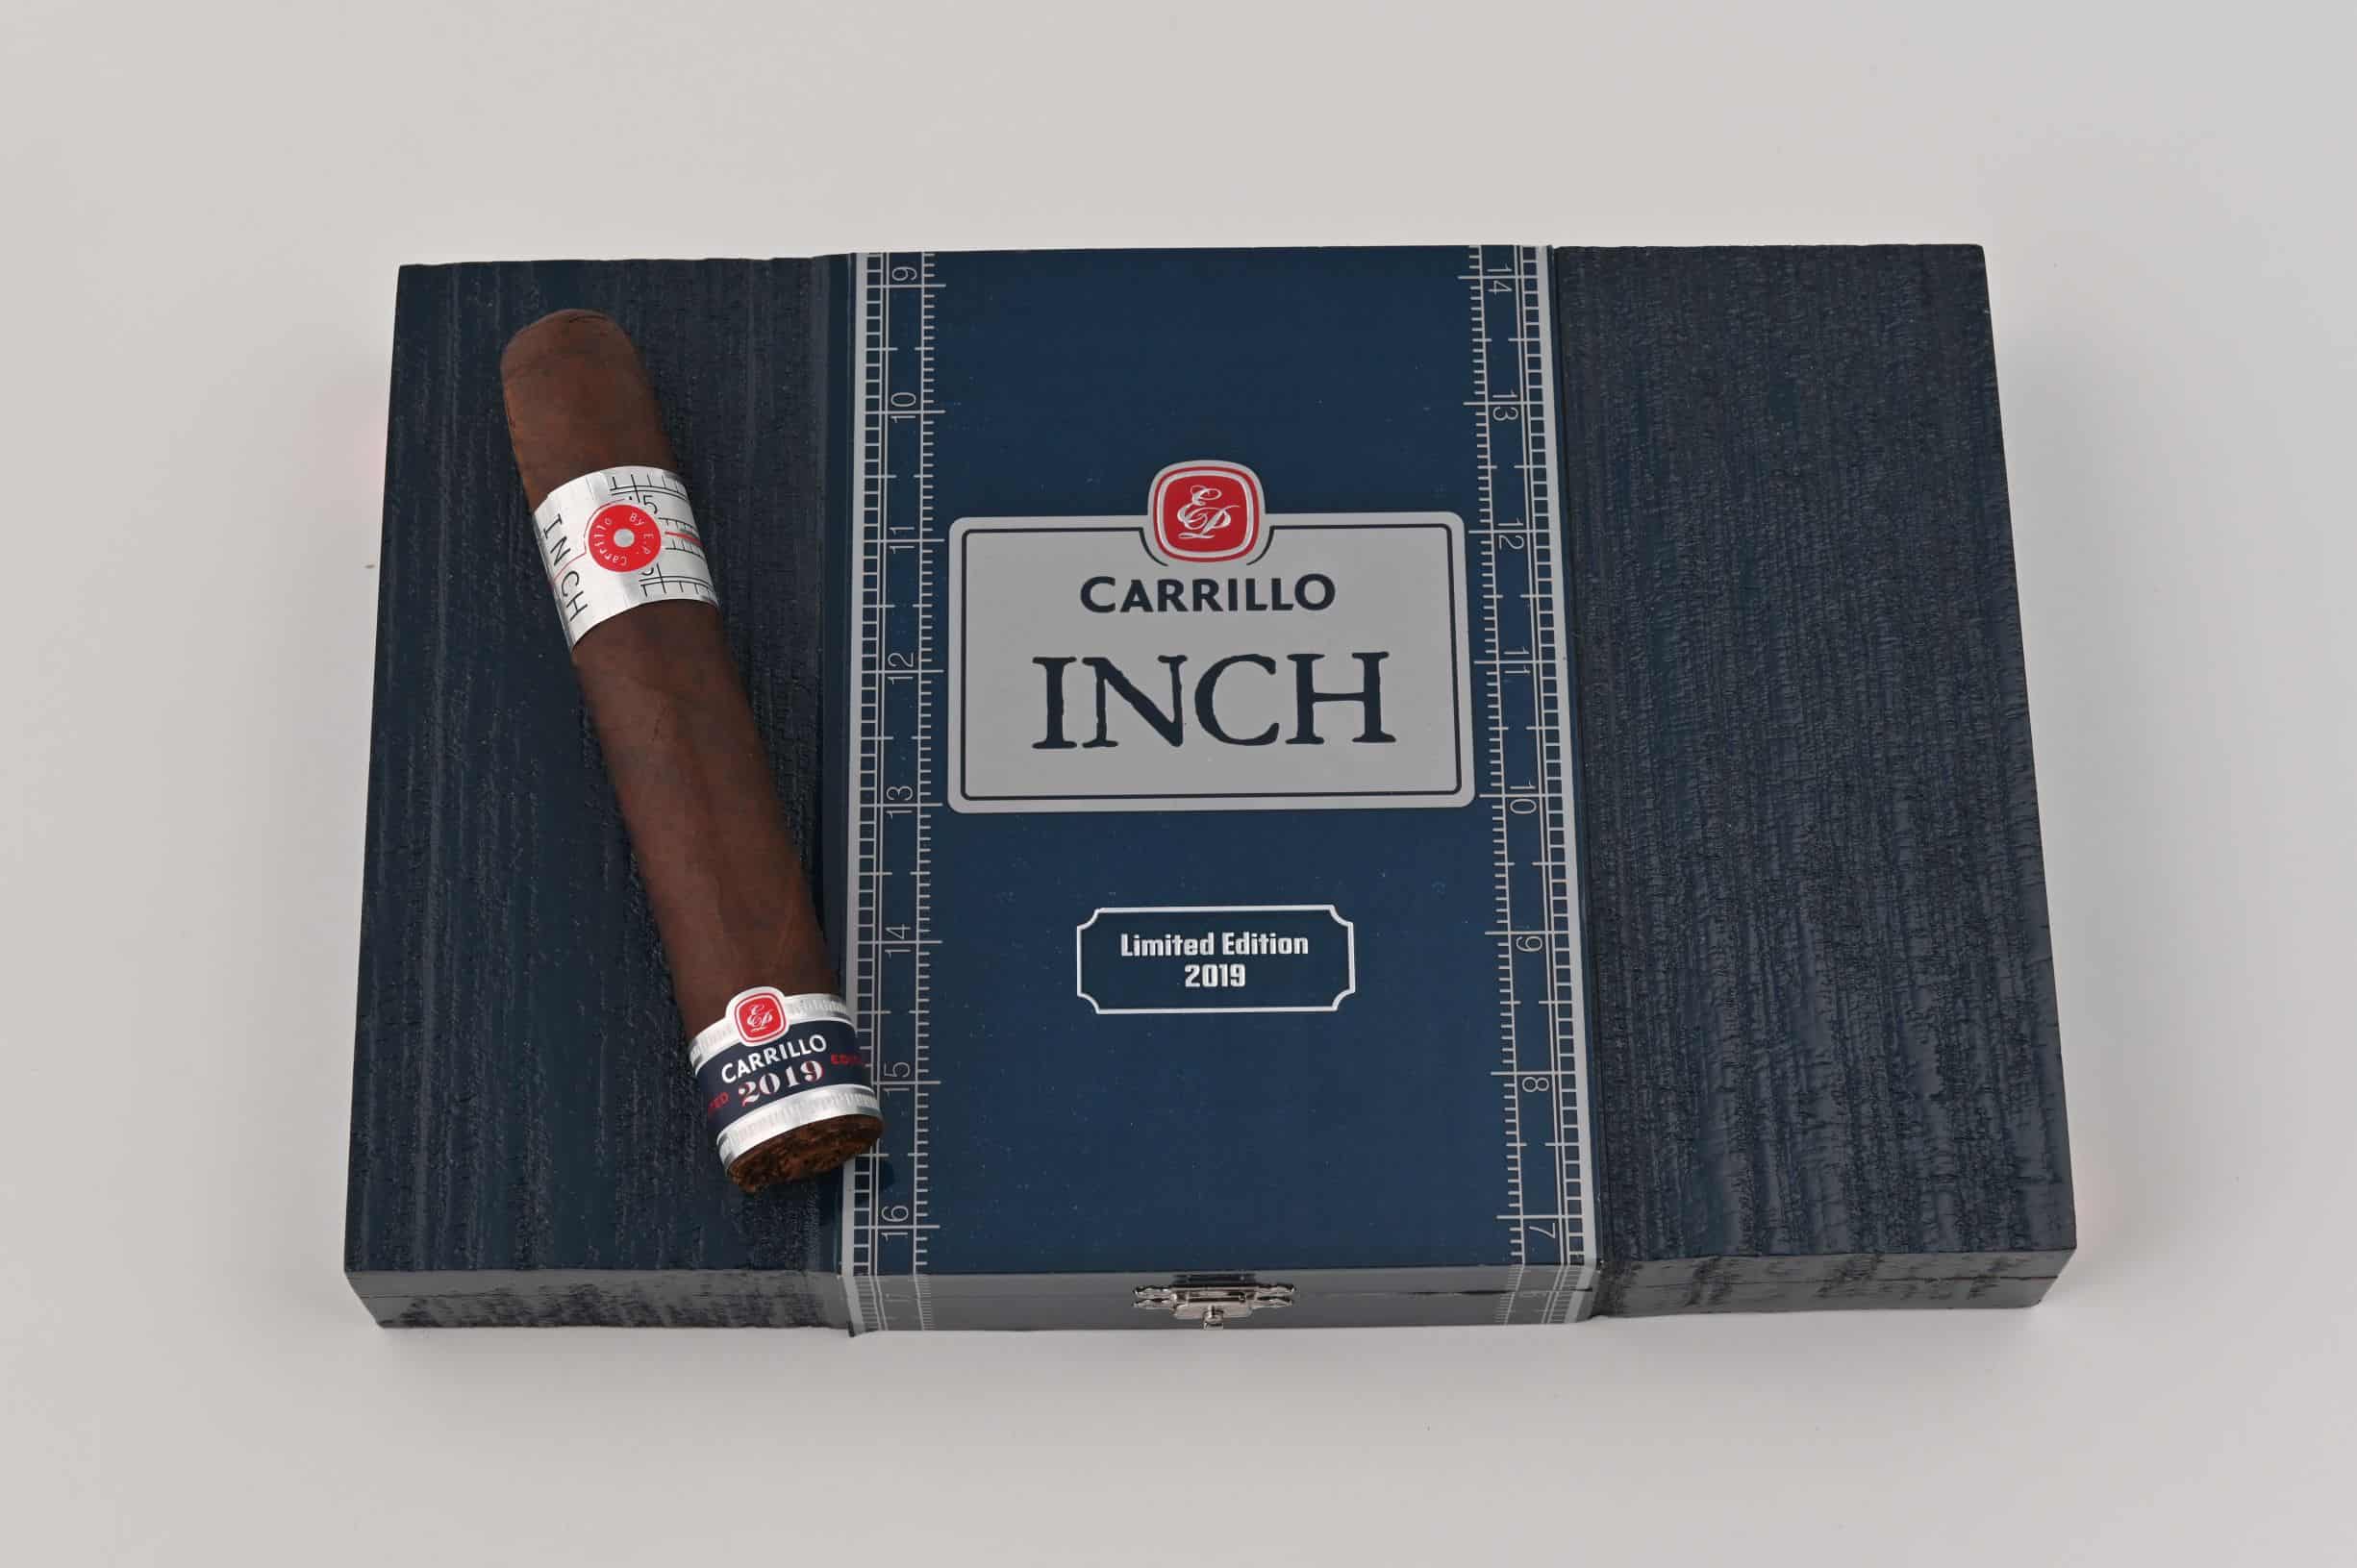 Limited-Edition Inch From E.P. Carrillo Shipping Today